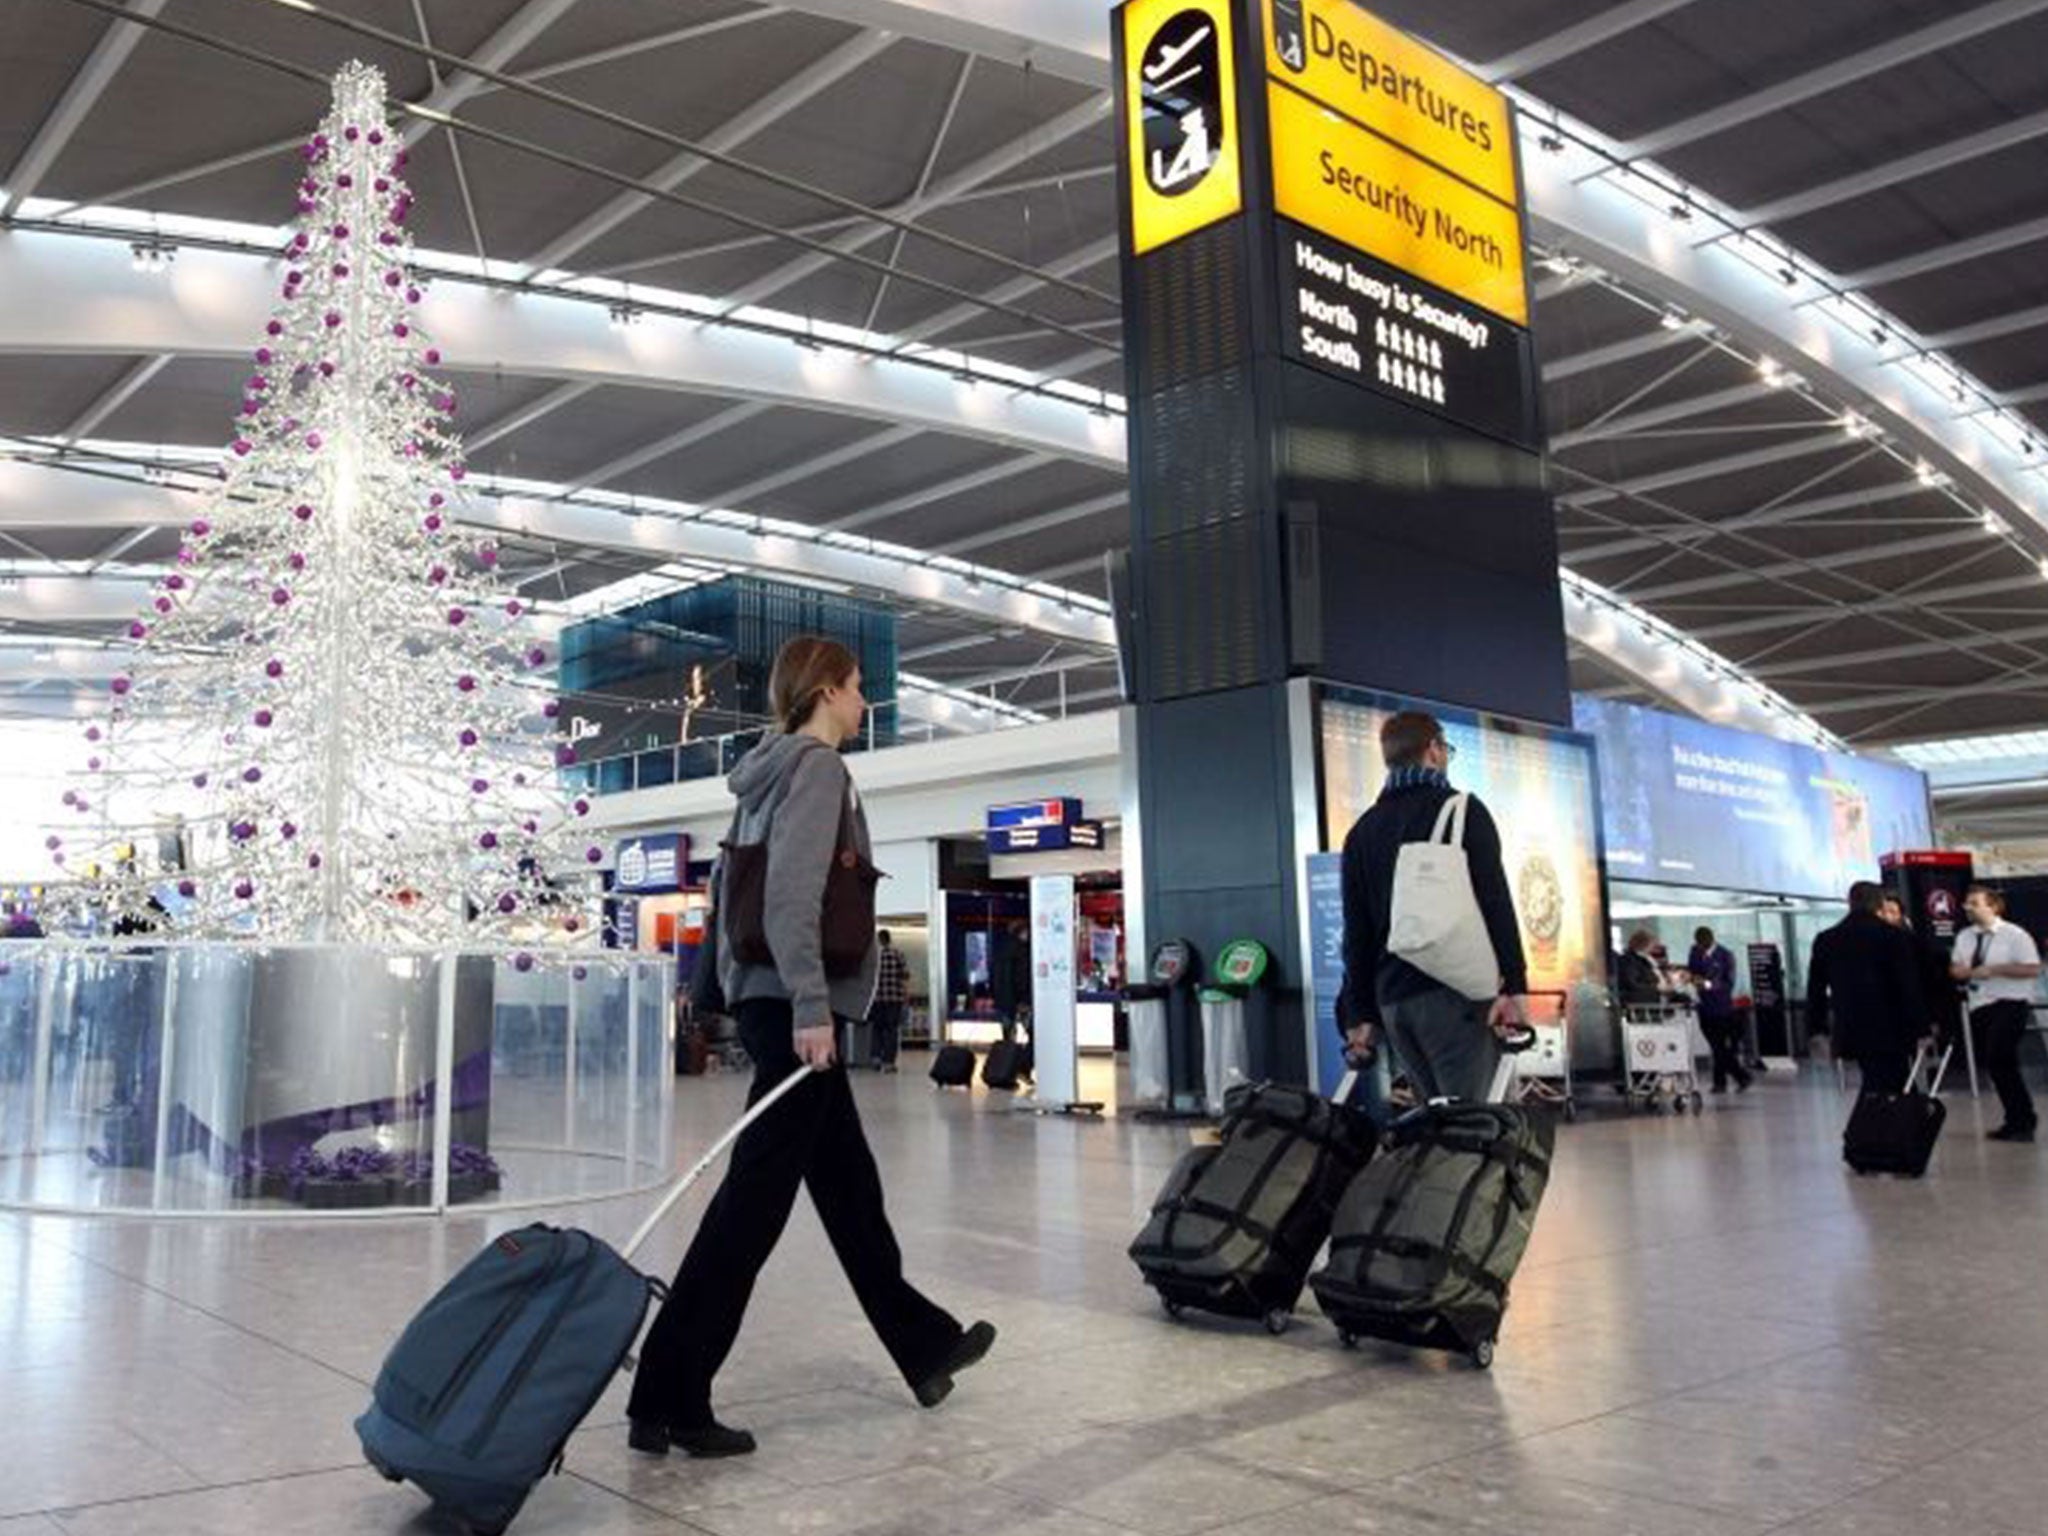 Up to four million Britons are heading overseas over the holidays, slightly more than last year